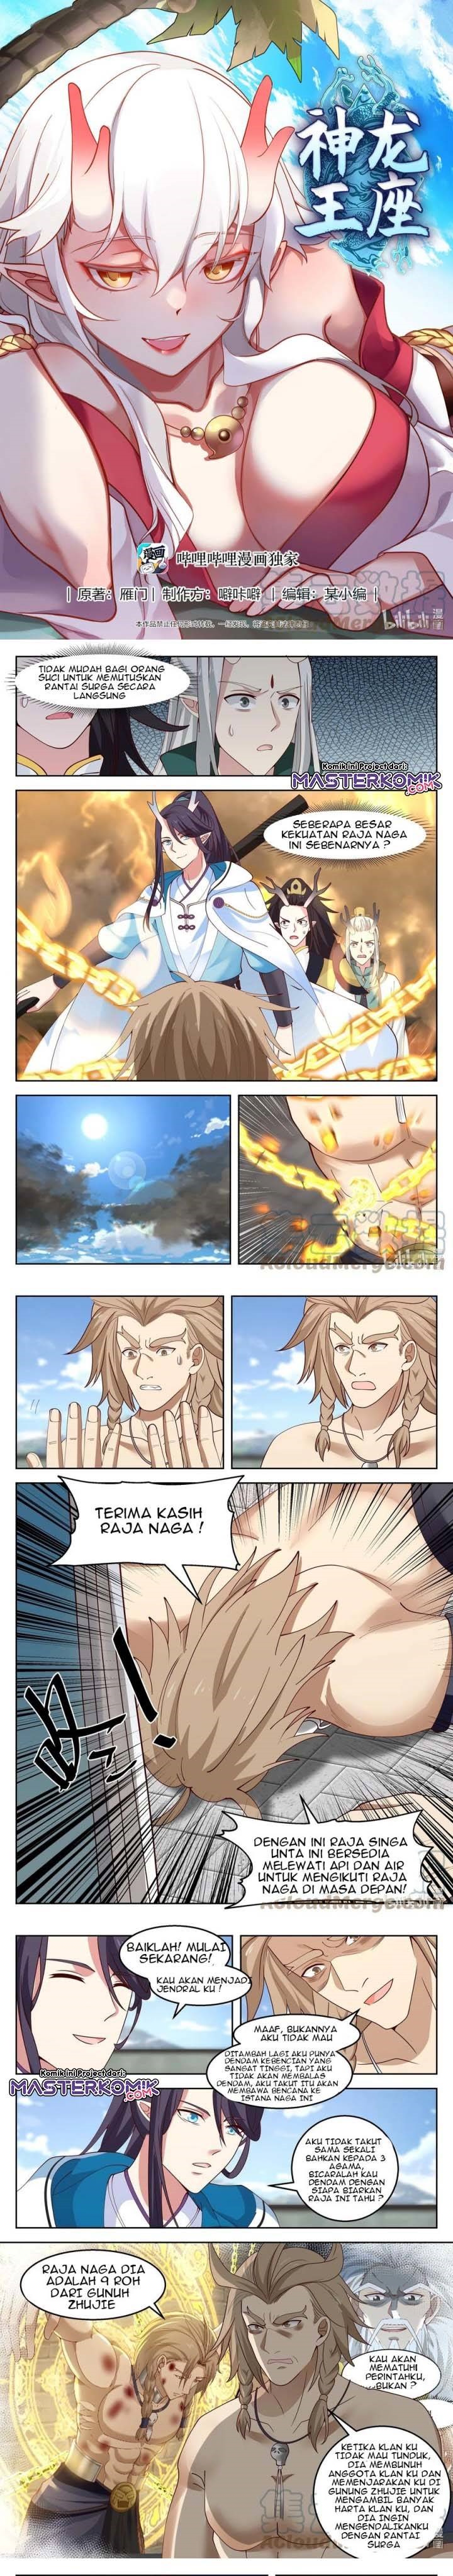 Dragon Throne Chapter 108